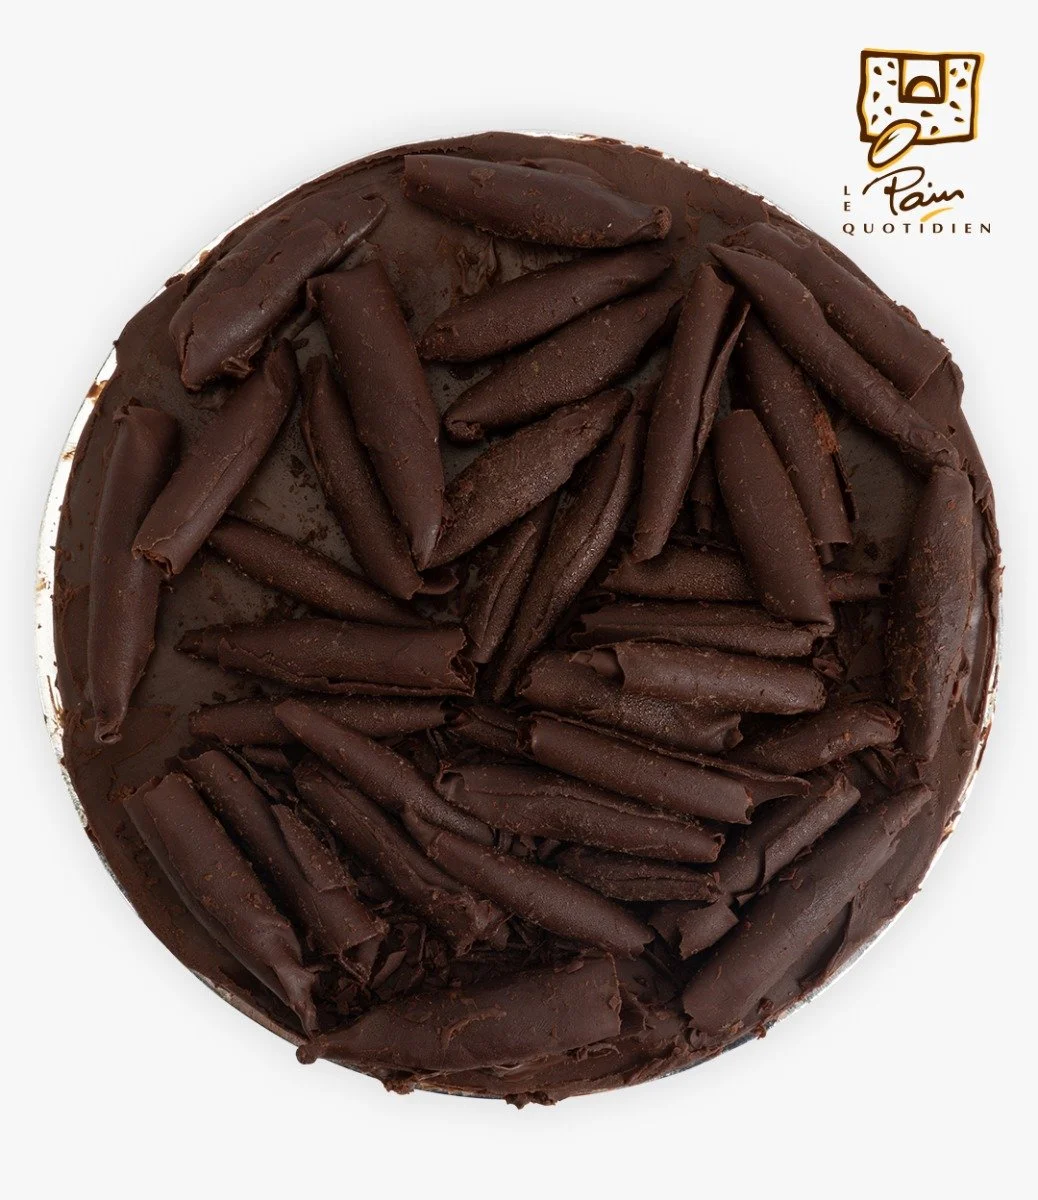 Chocolate Praline Cake by Le Pain Quotidien